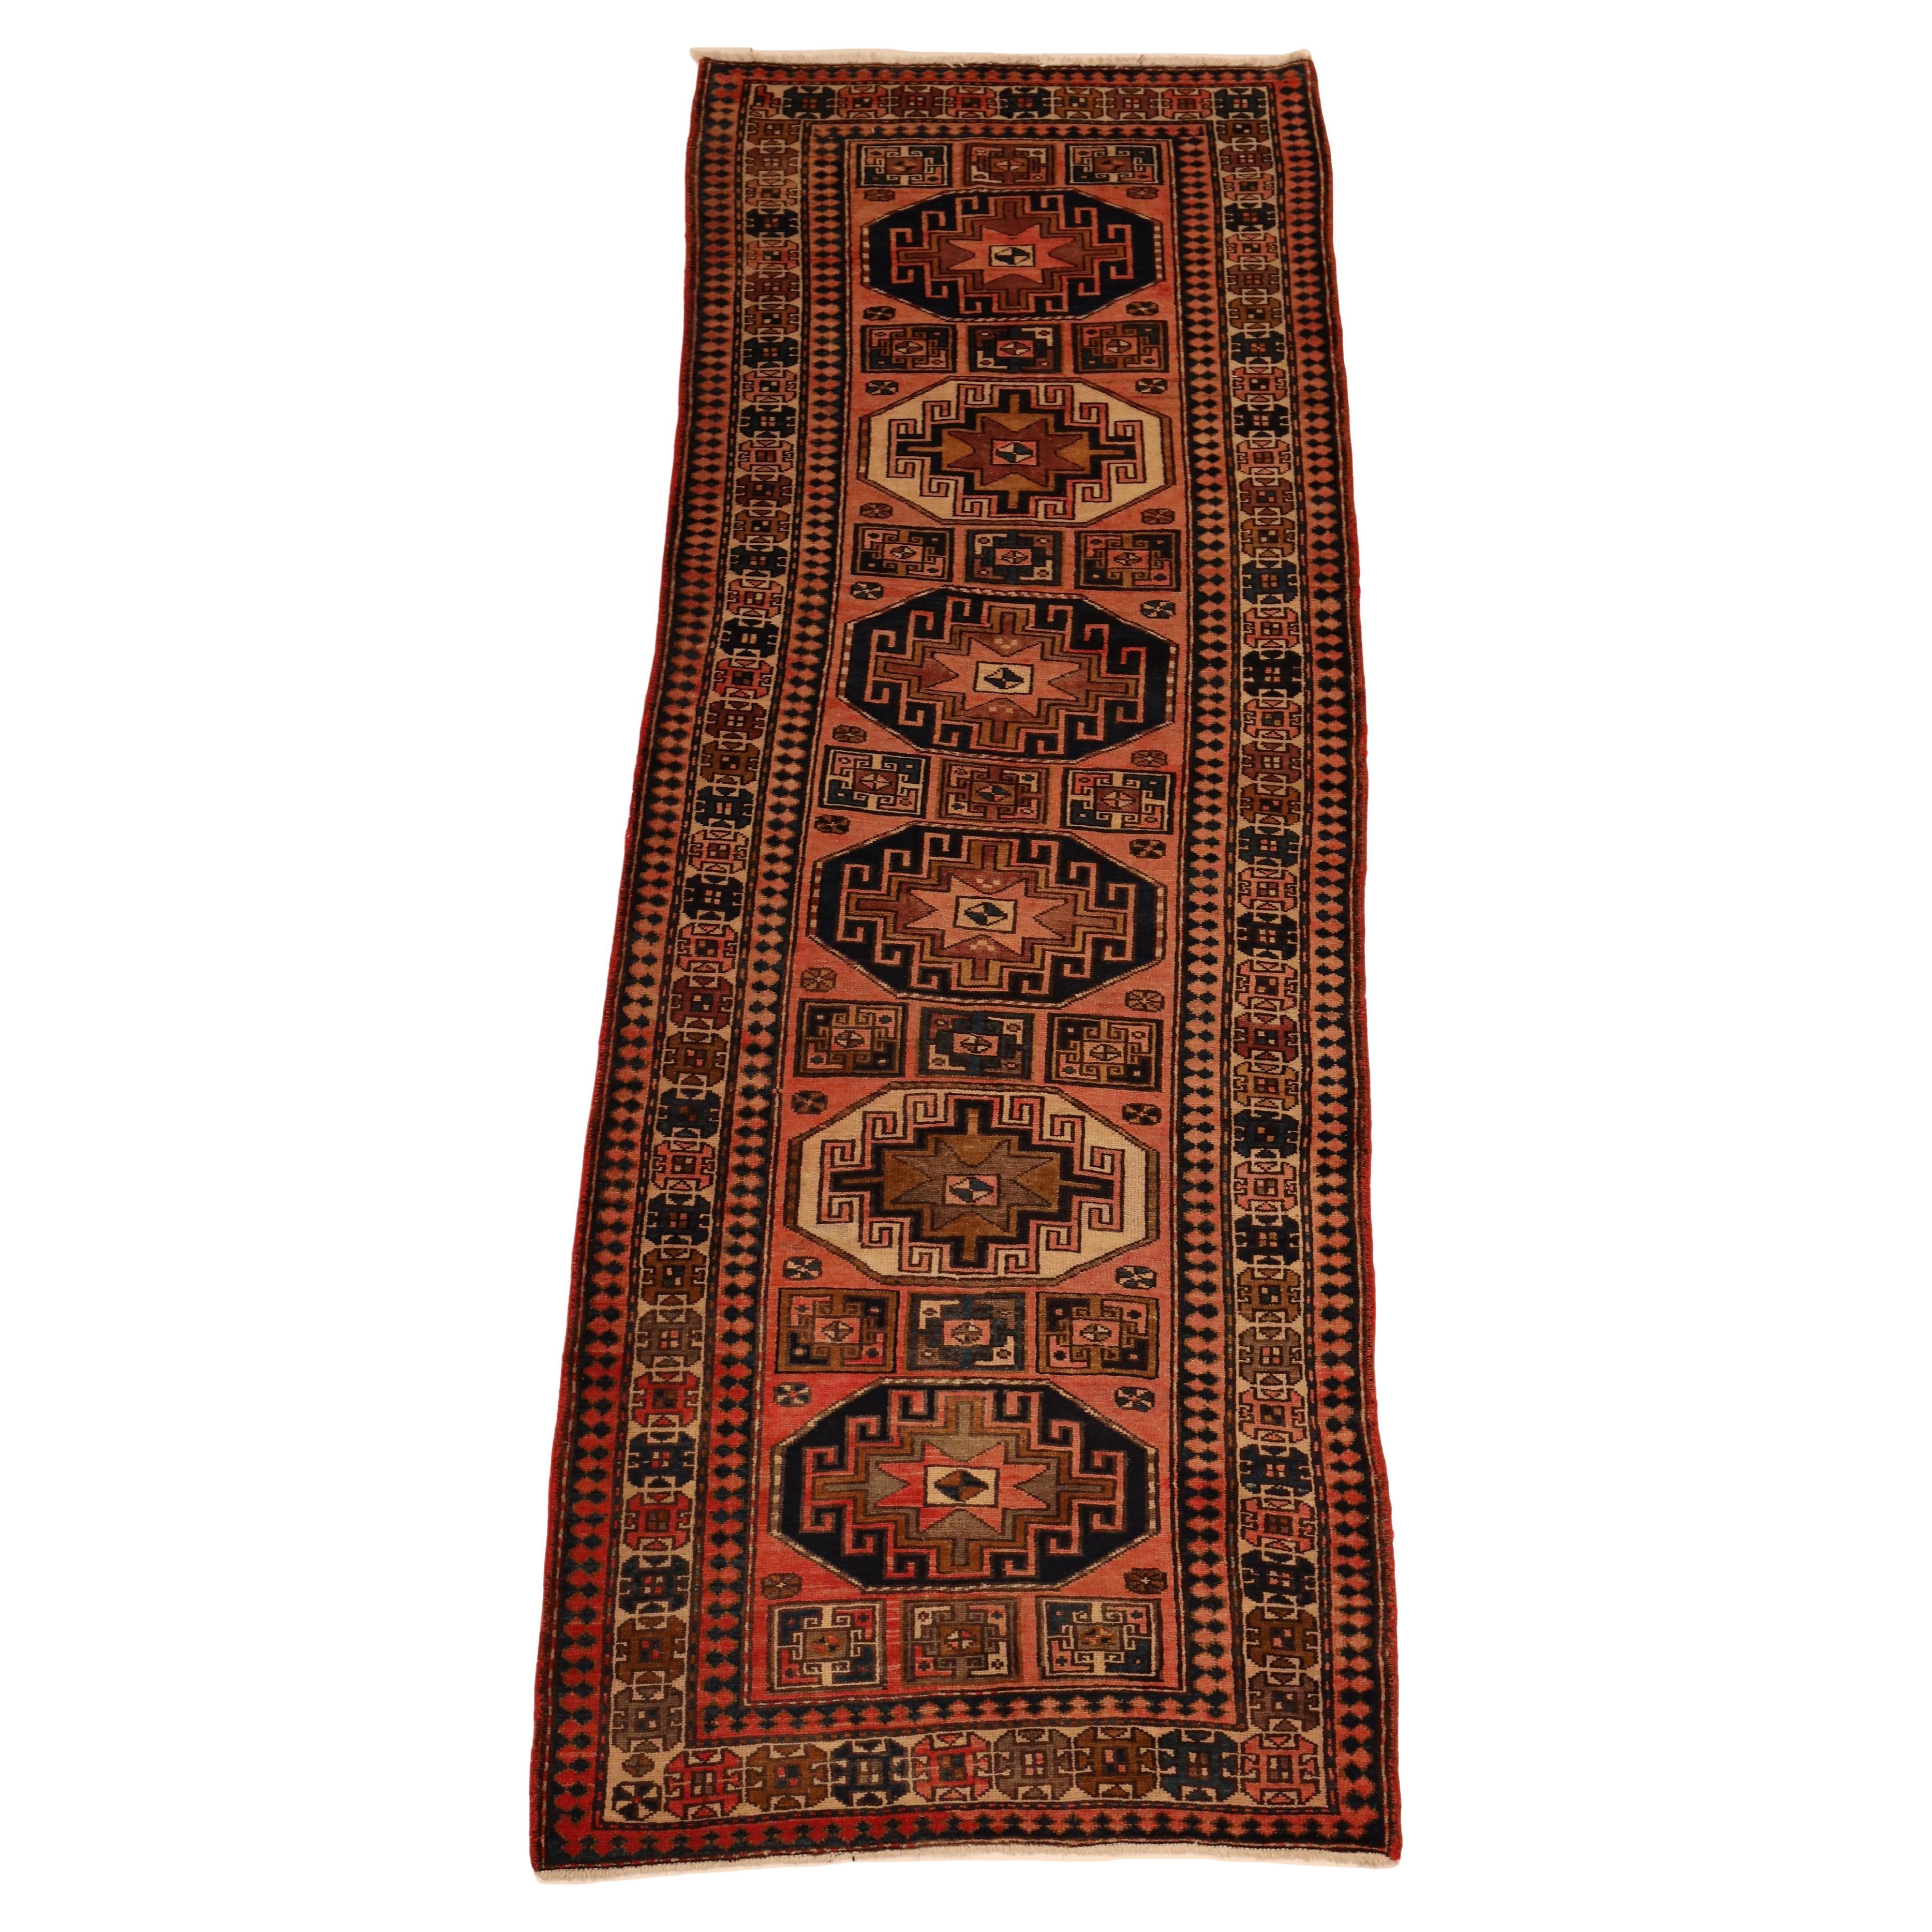 North-West Persian Semi-Antique Runner - 3'5" x 9'10" For Sale